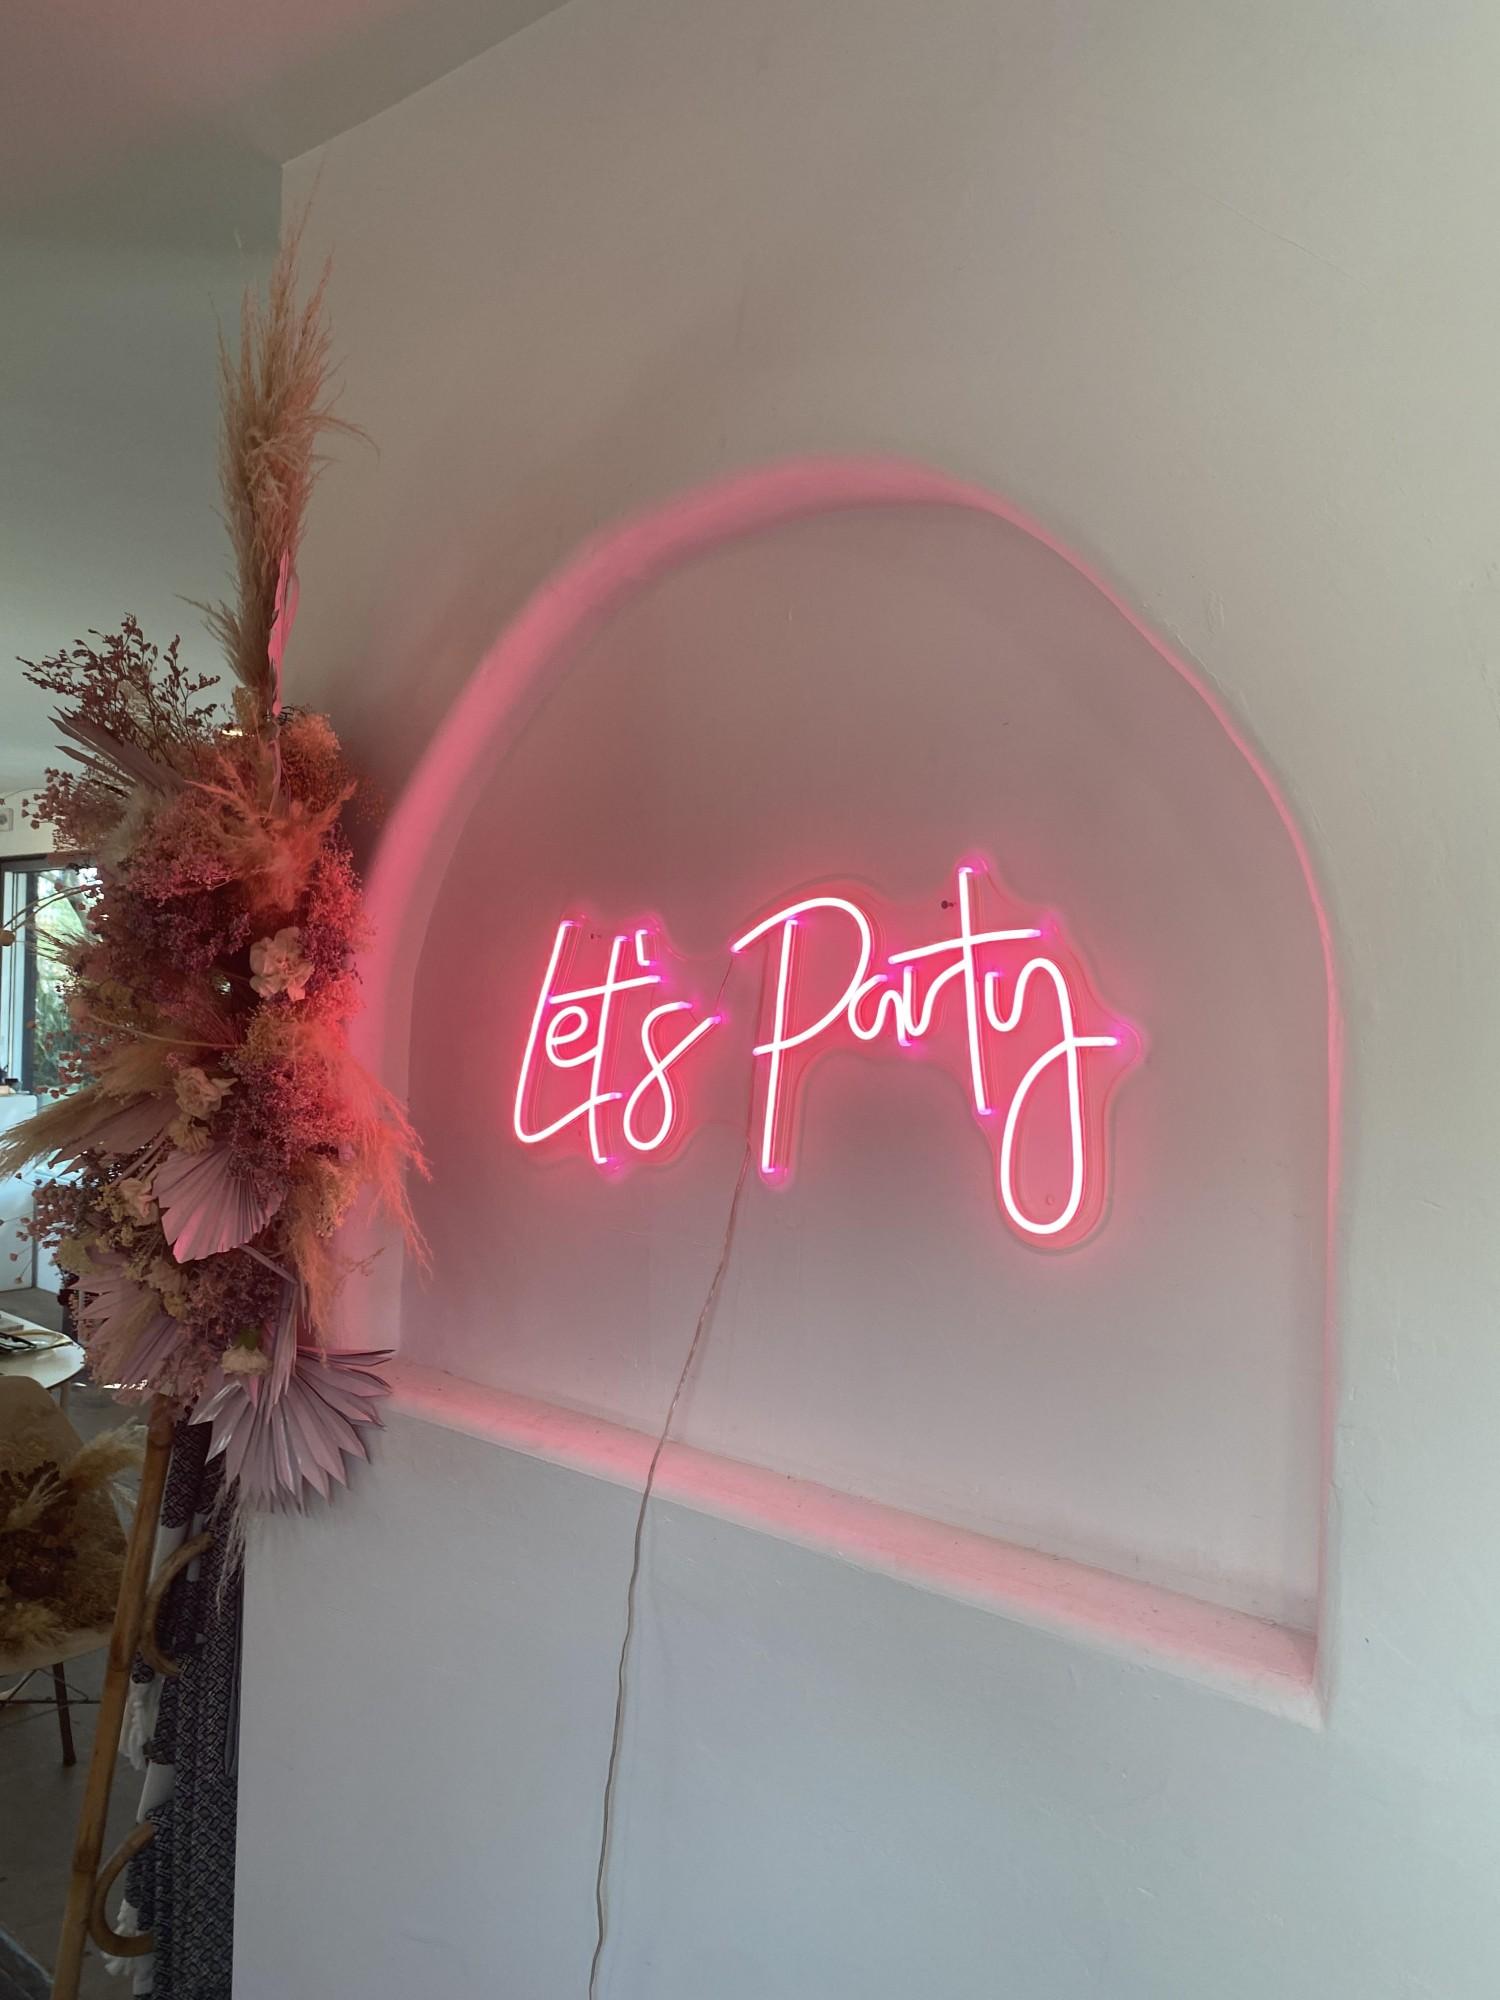  Neon sign “Let’s Party” from a shop inside the MSA Annex located at 267 South Avenida del Convento.